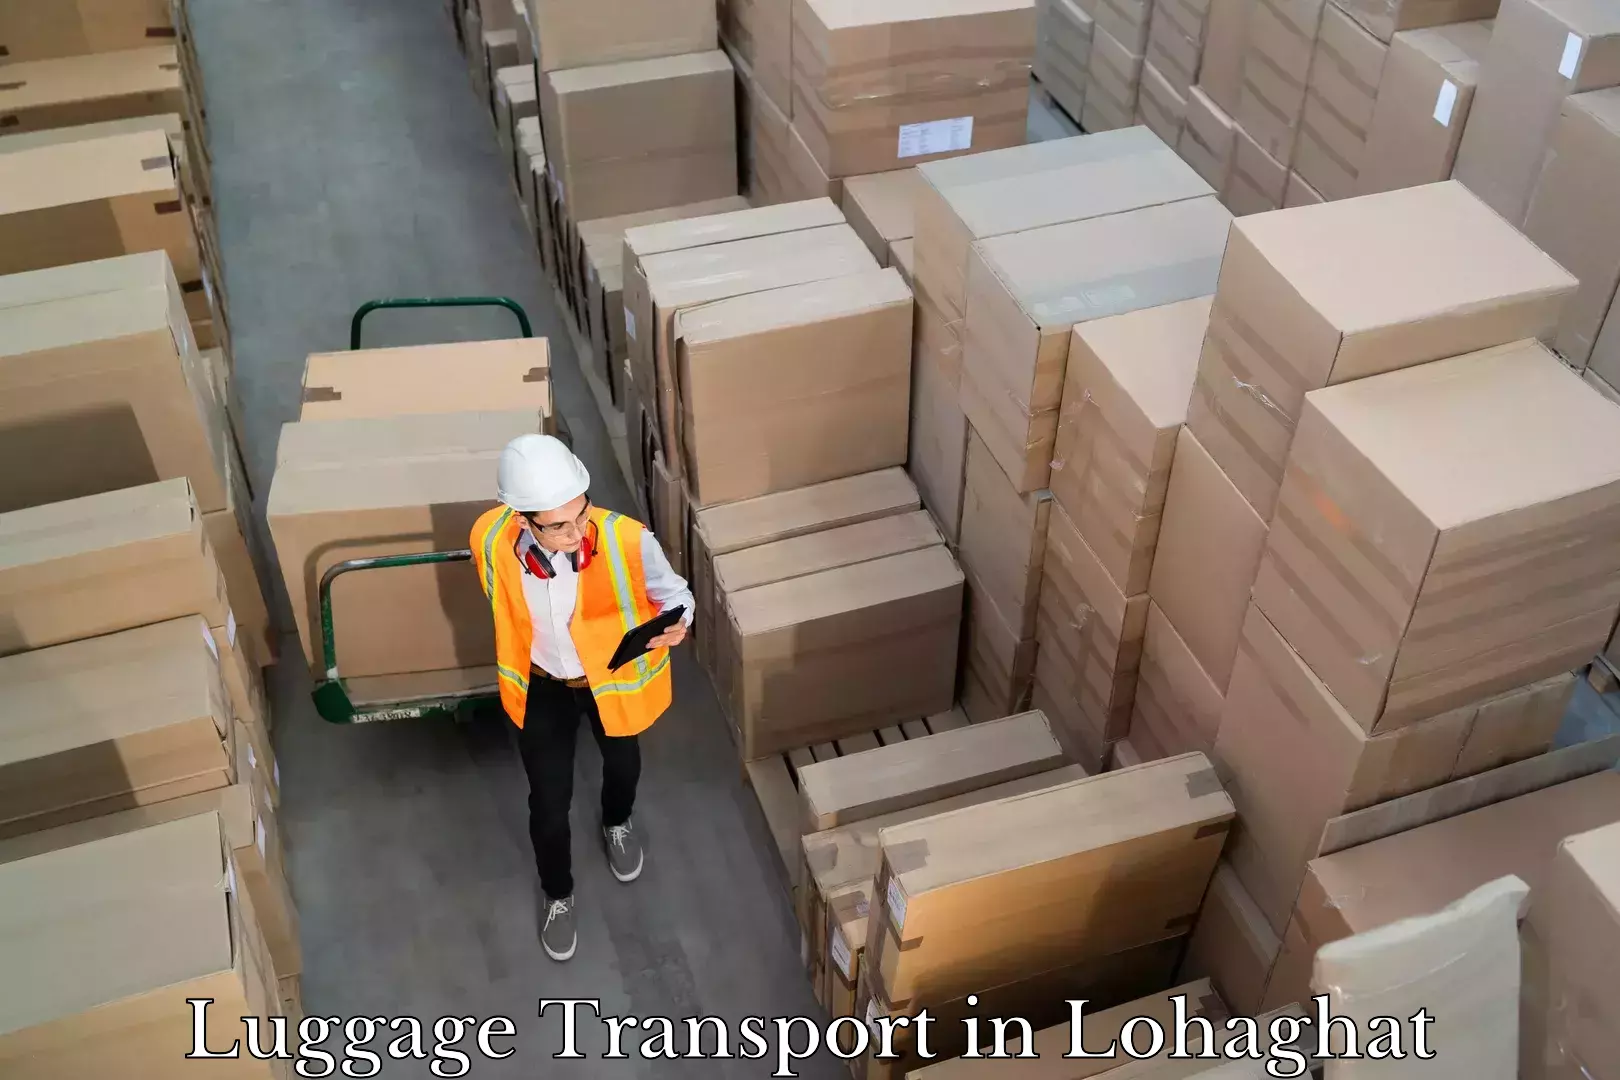 Baggage transport management in Lohaghat